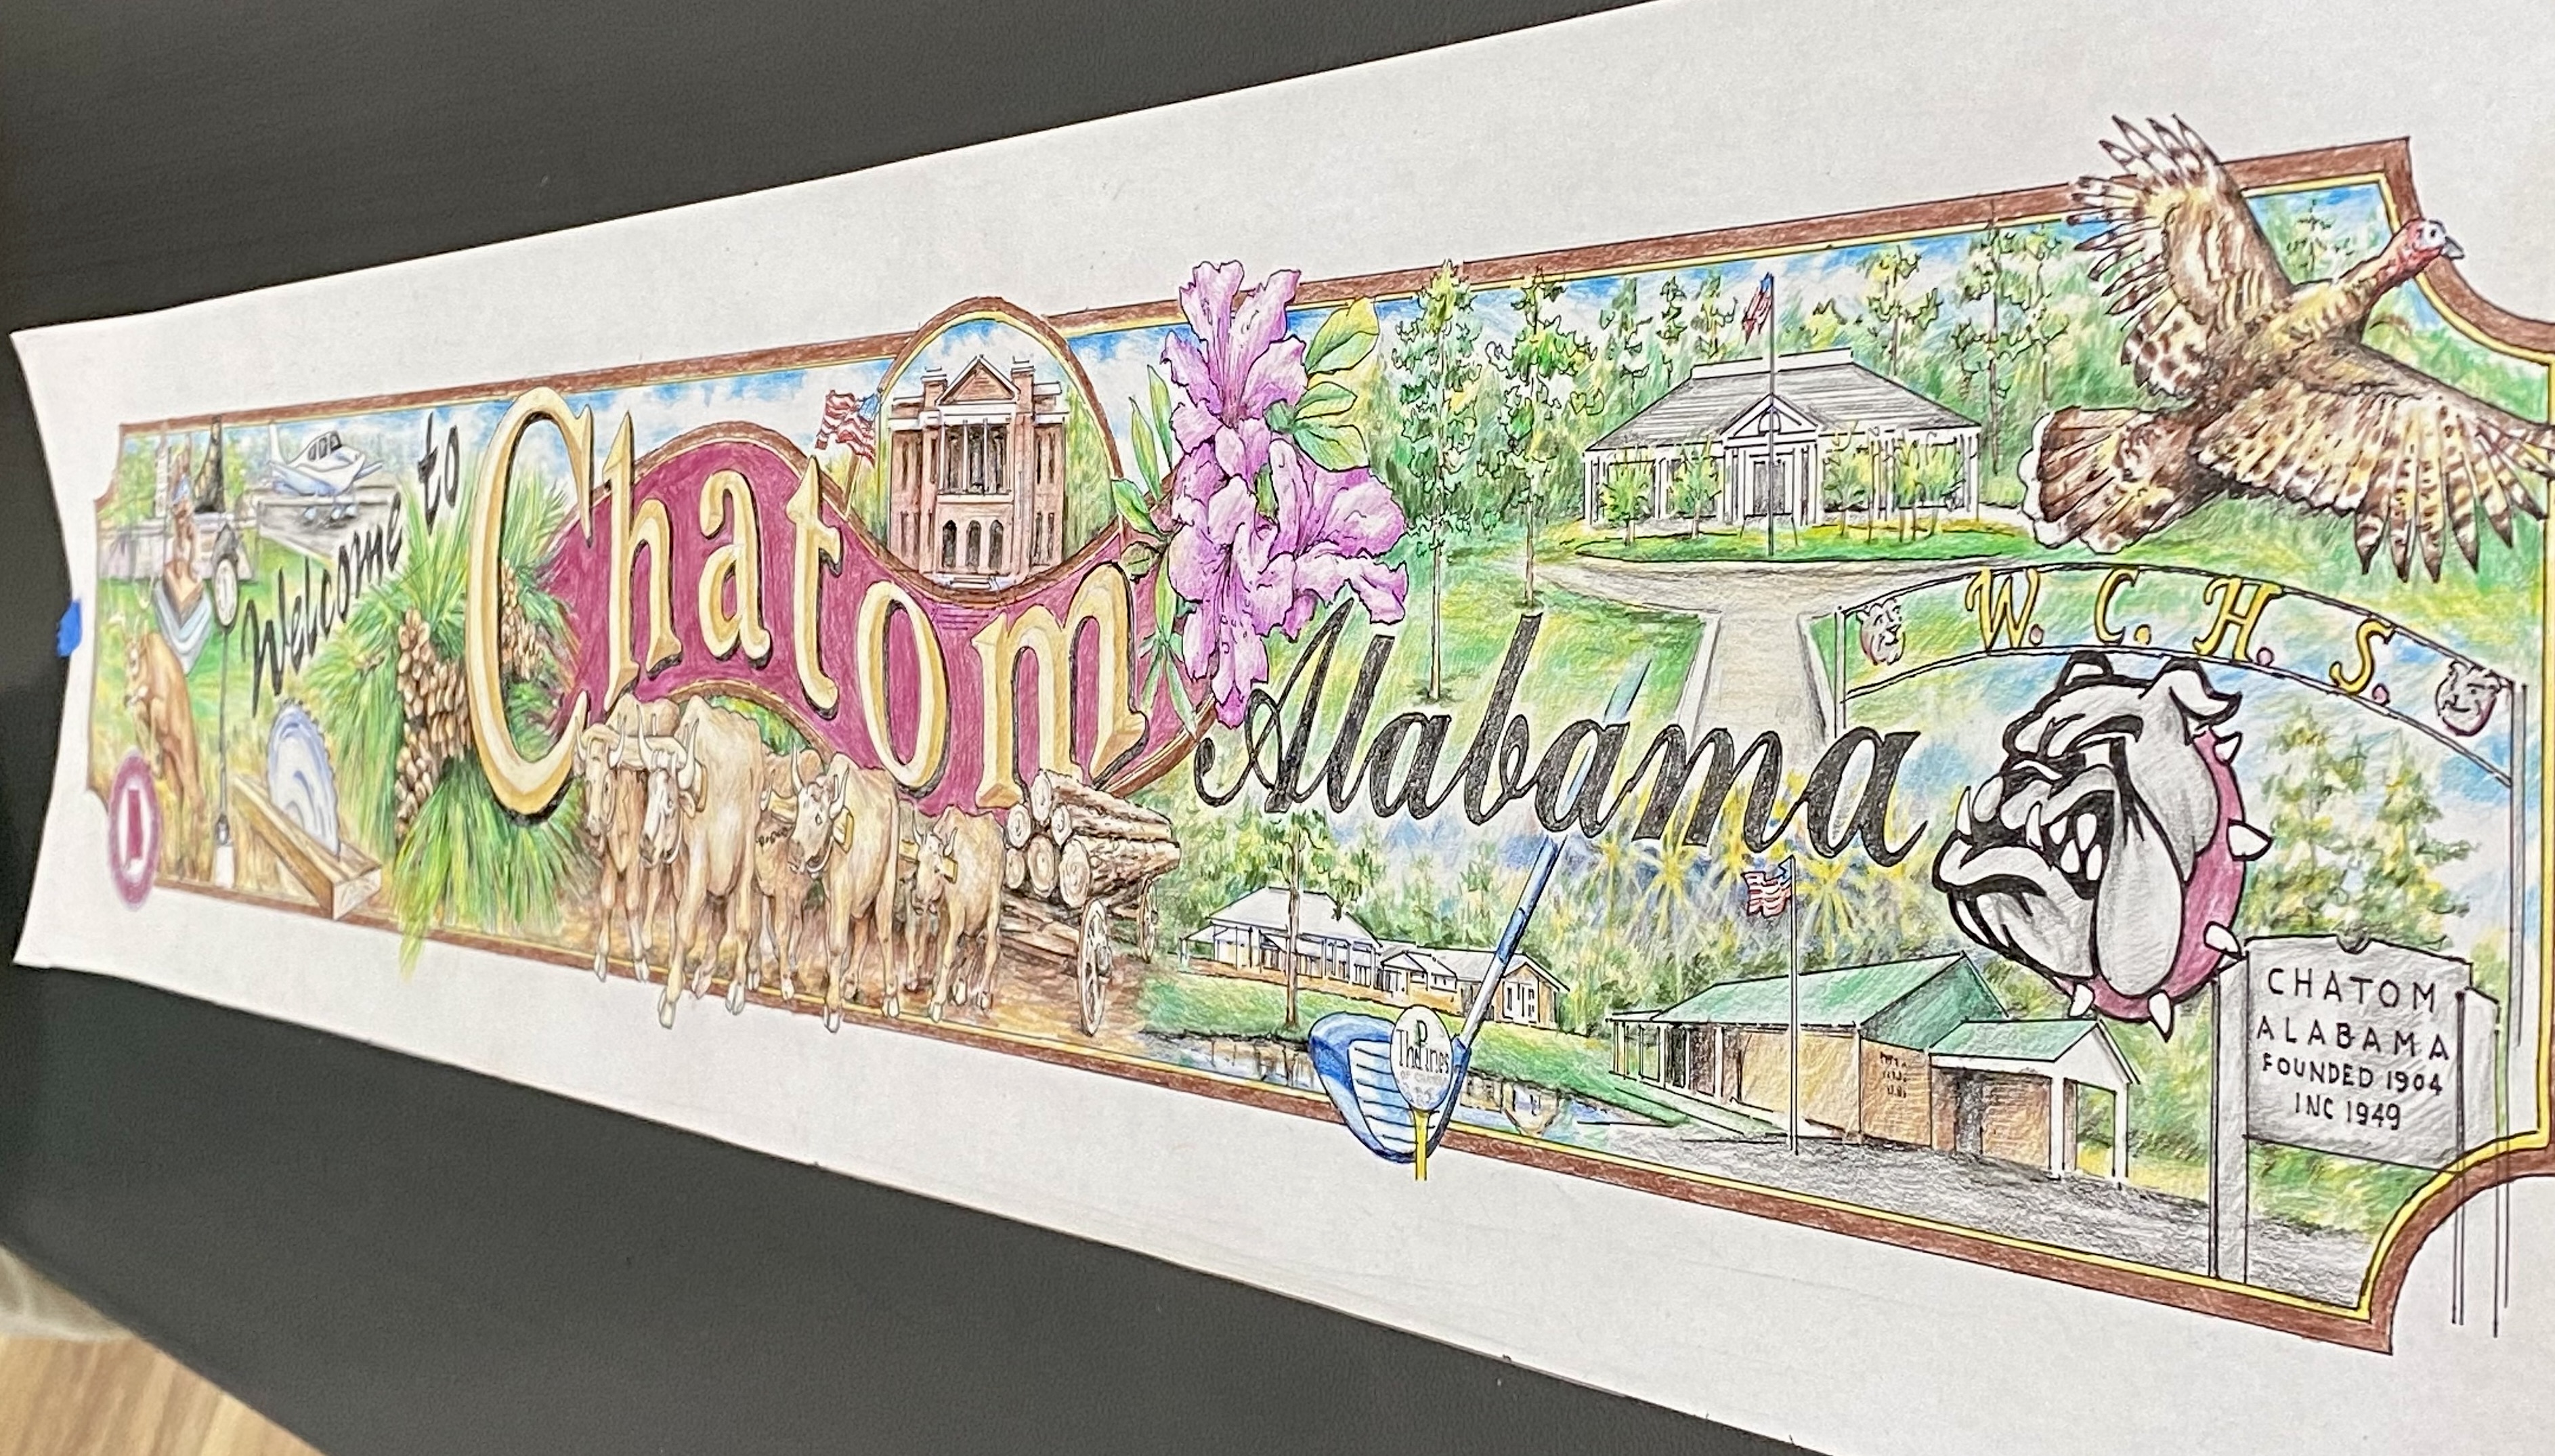 Artist Joe Wilson created a printed design as he developed plans for the Chatom mural.